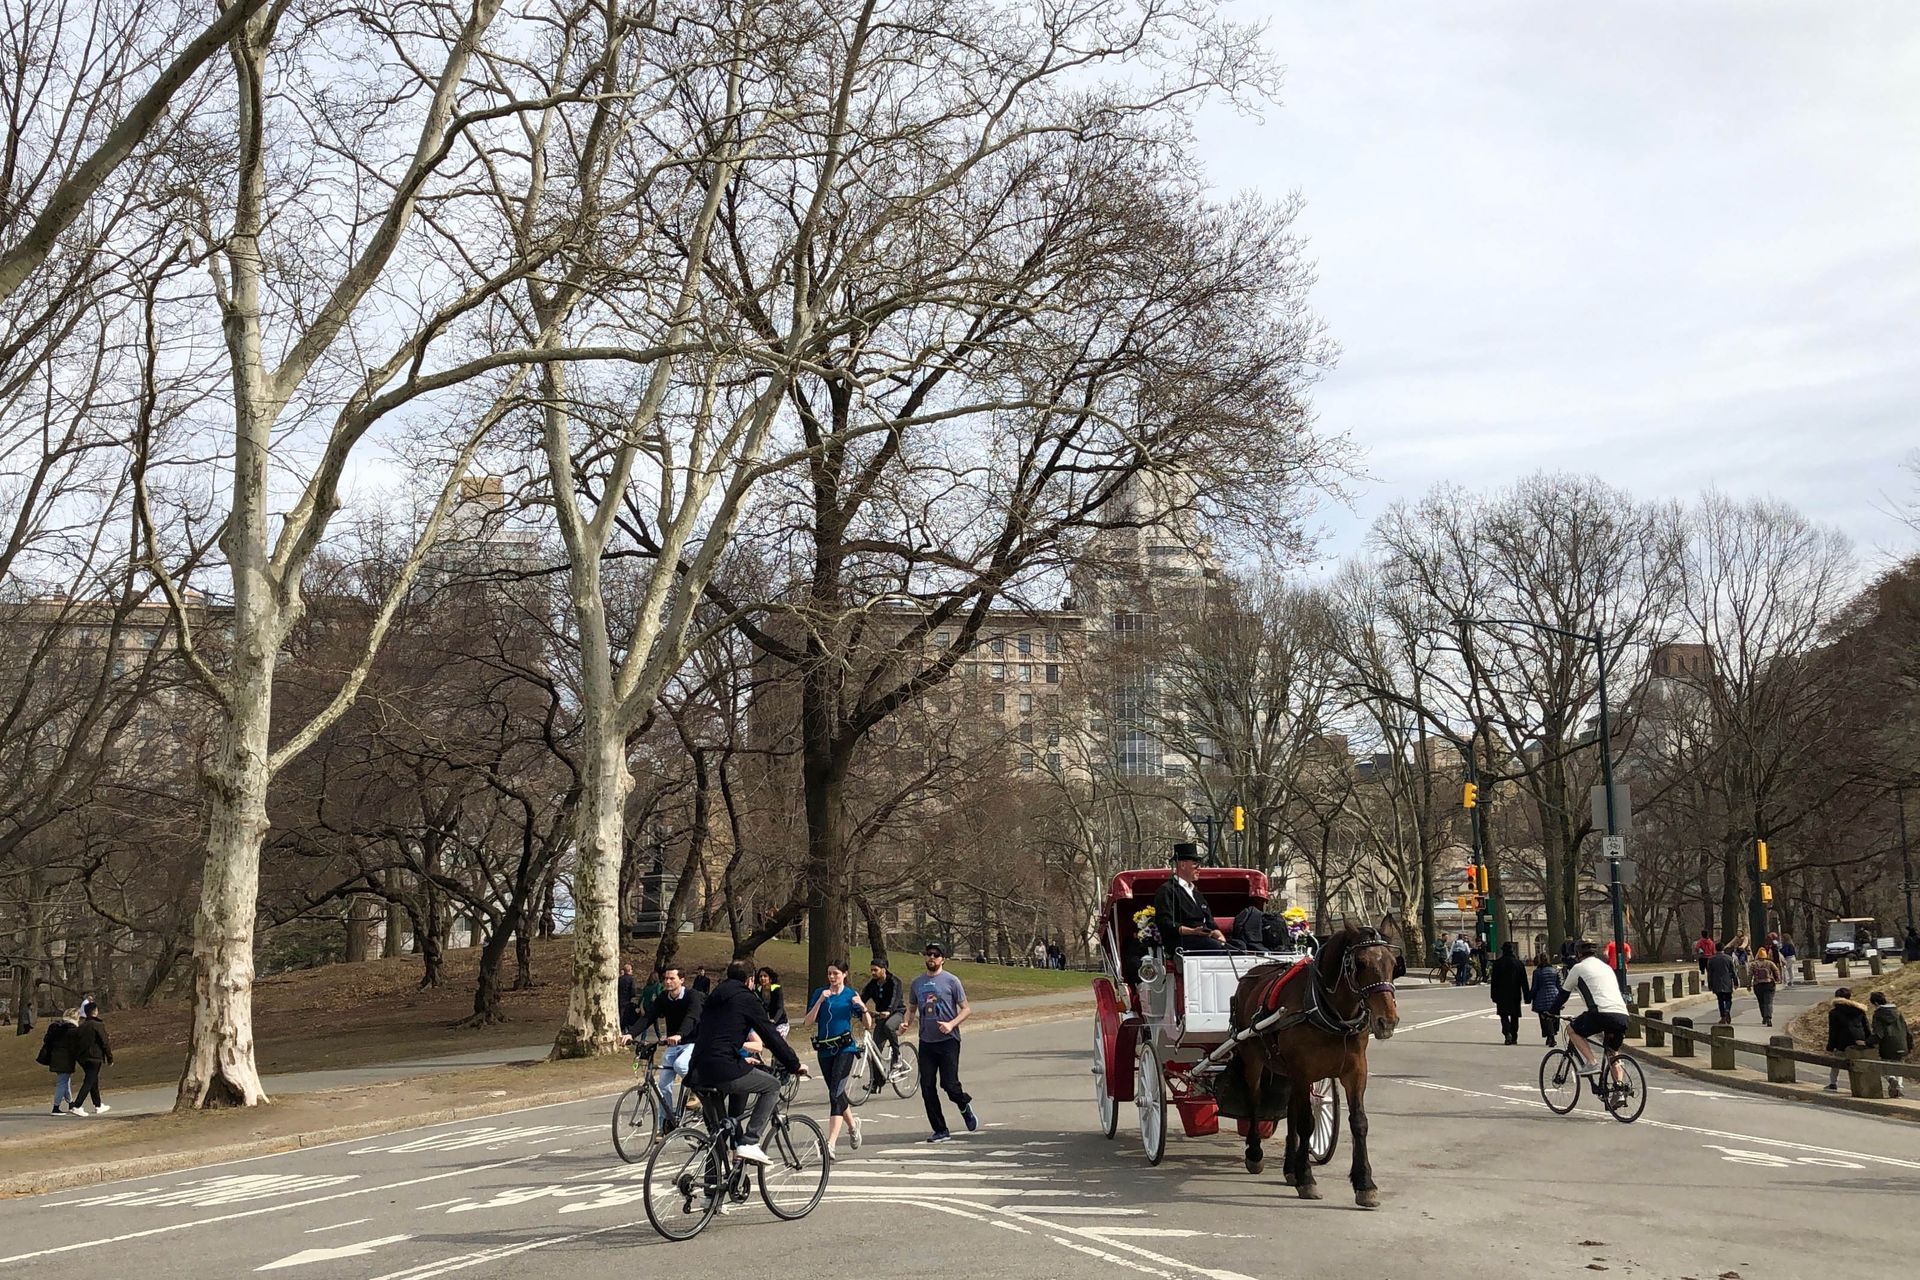 Central Park, New York carriage horse and bicycle riders